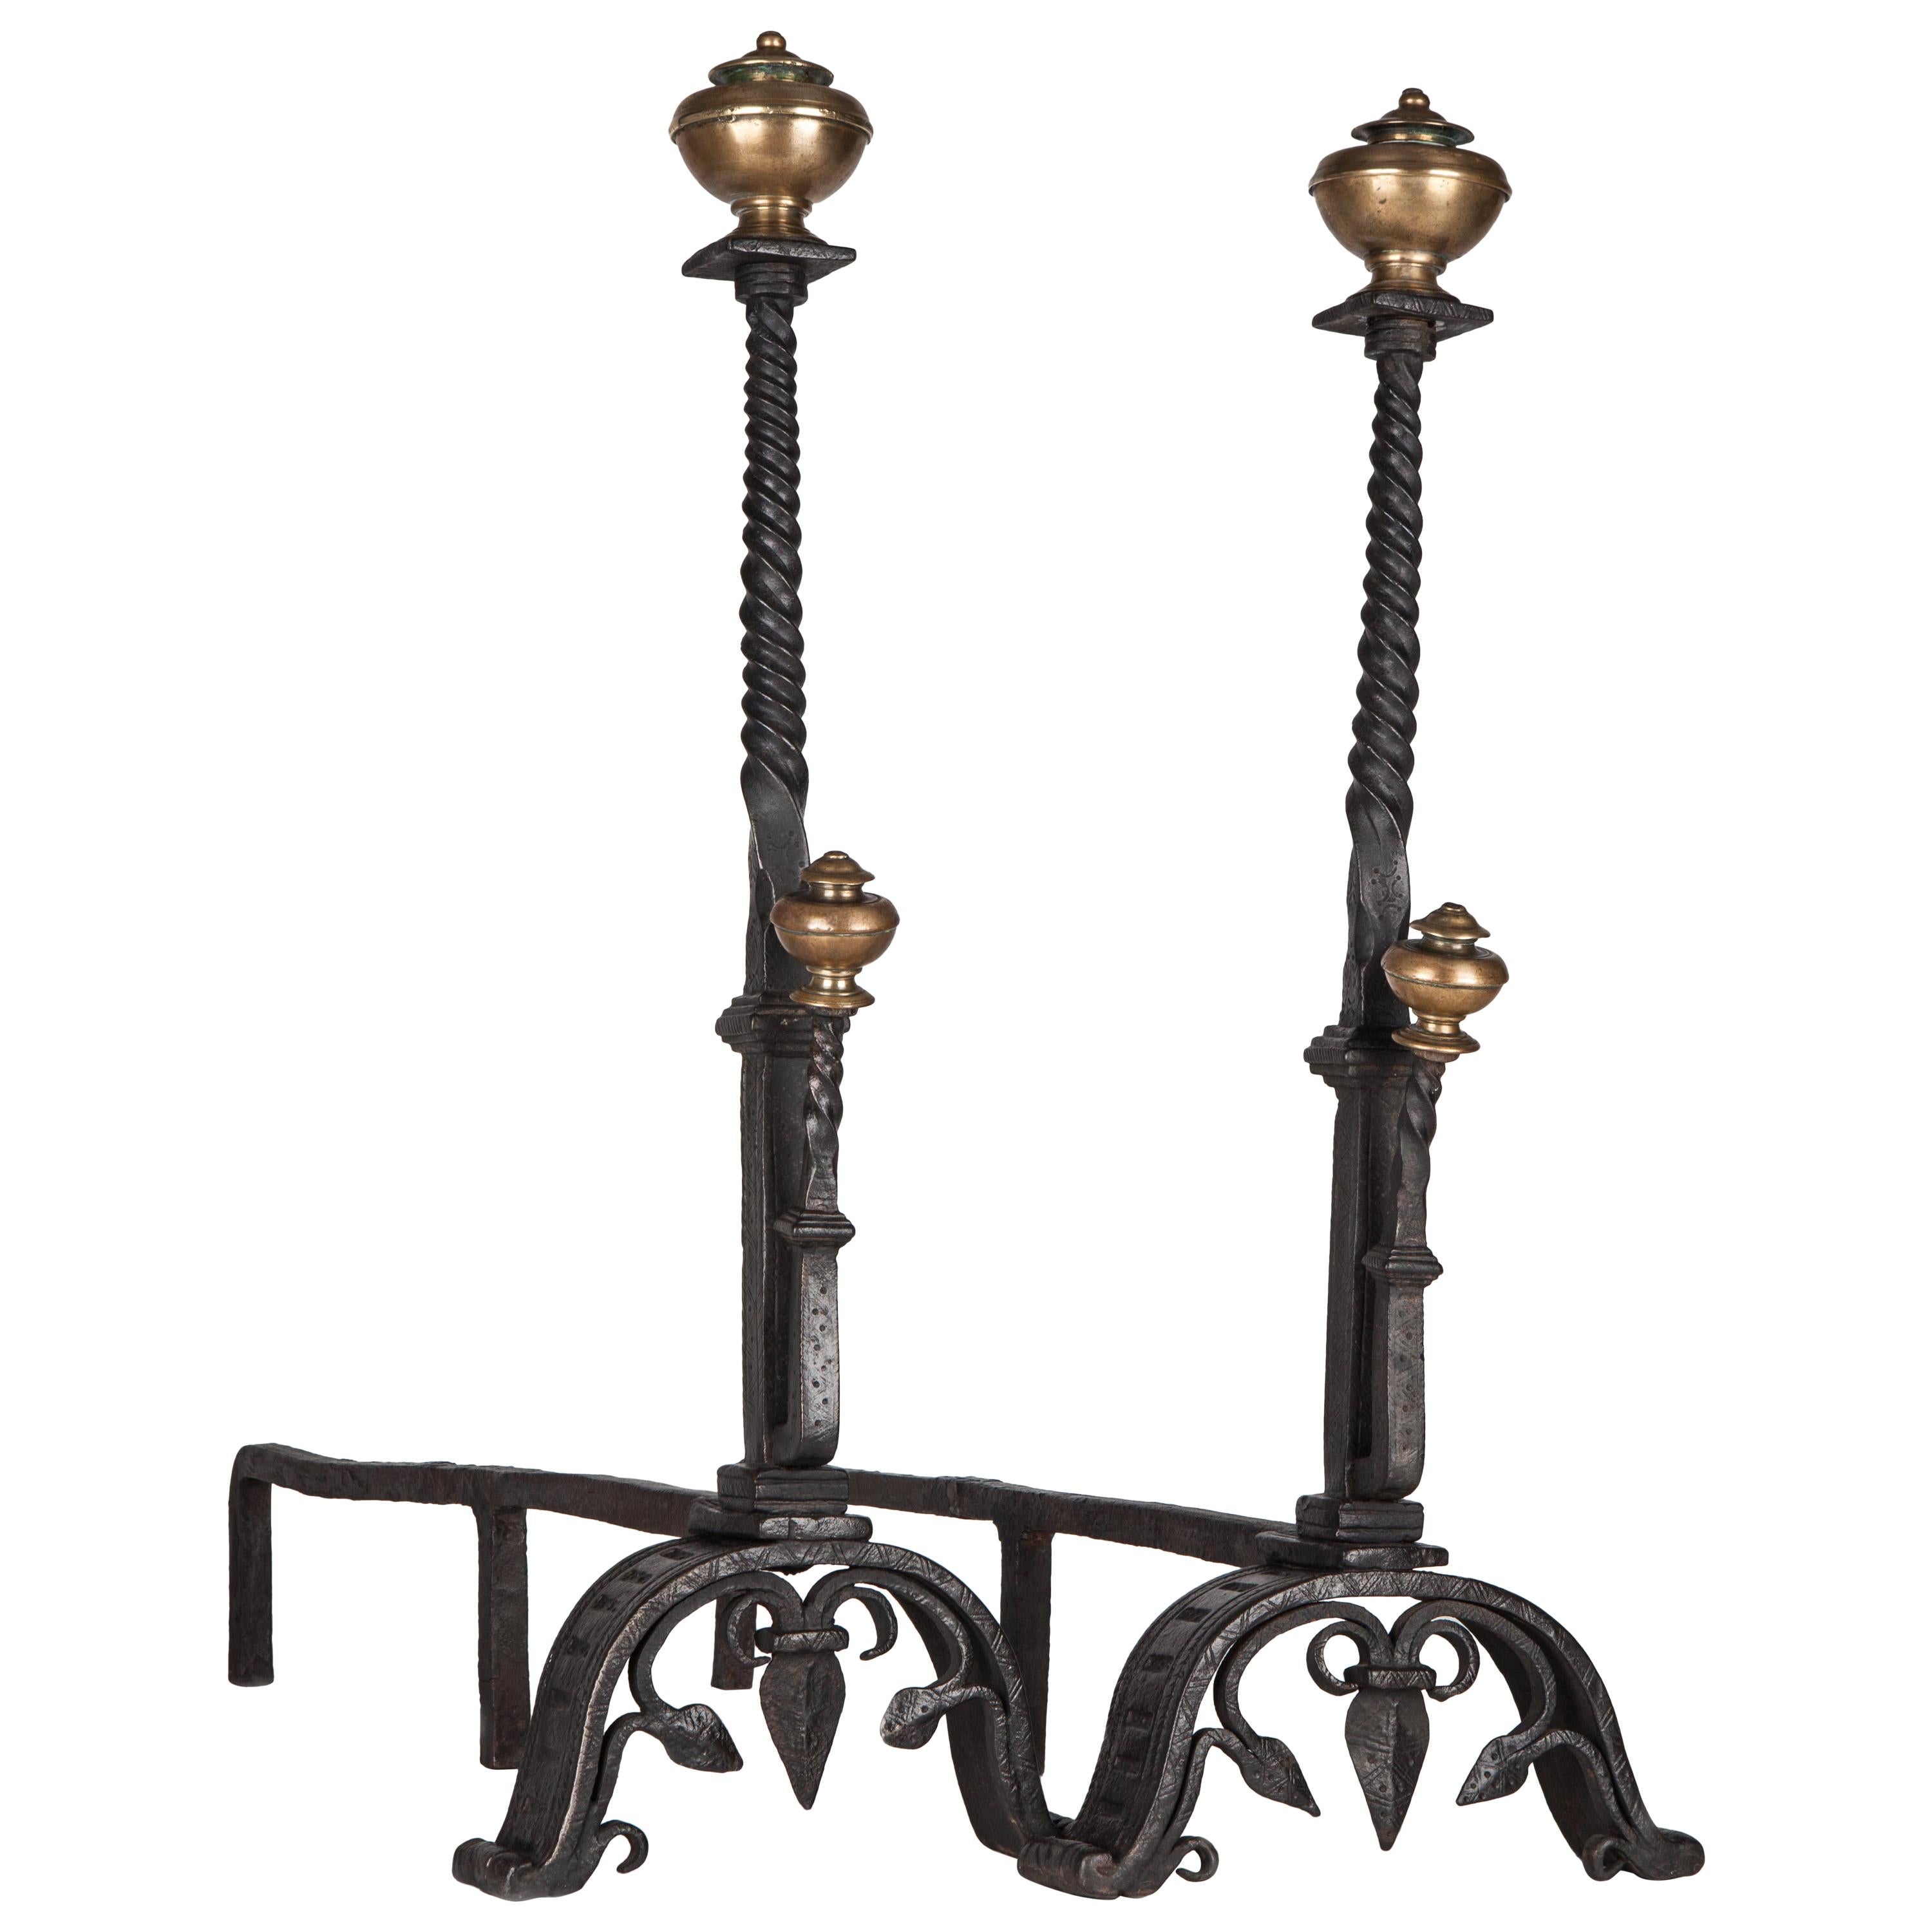 Gothic Wrought Iron Andirons with Forged Scrolled Feet and Brass Finials, 1920s